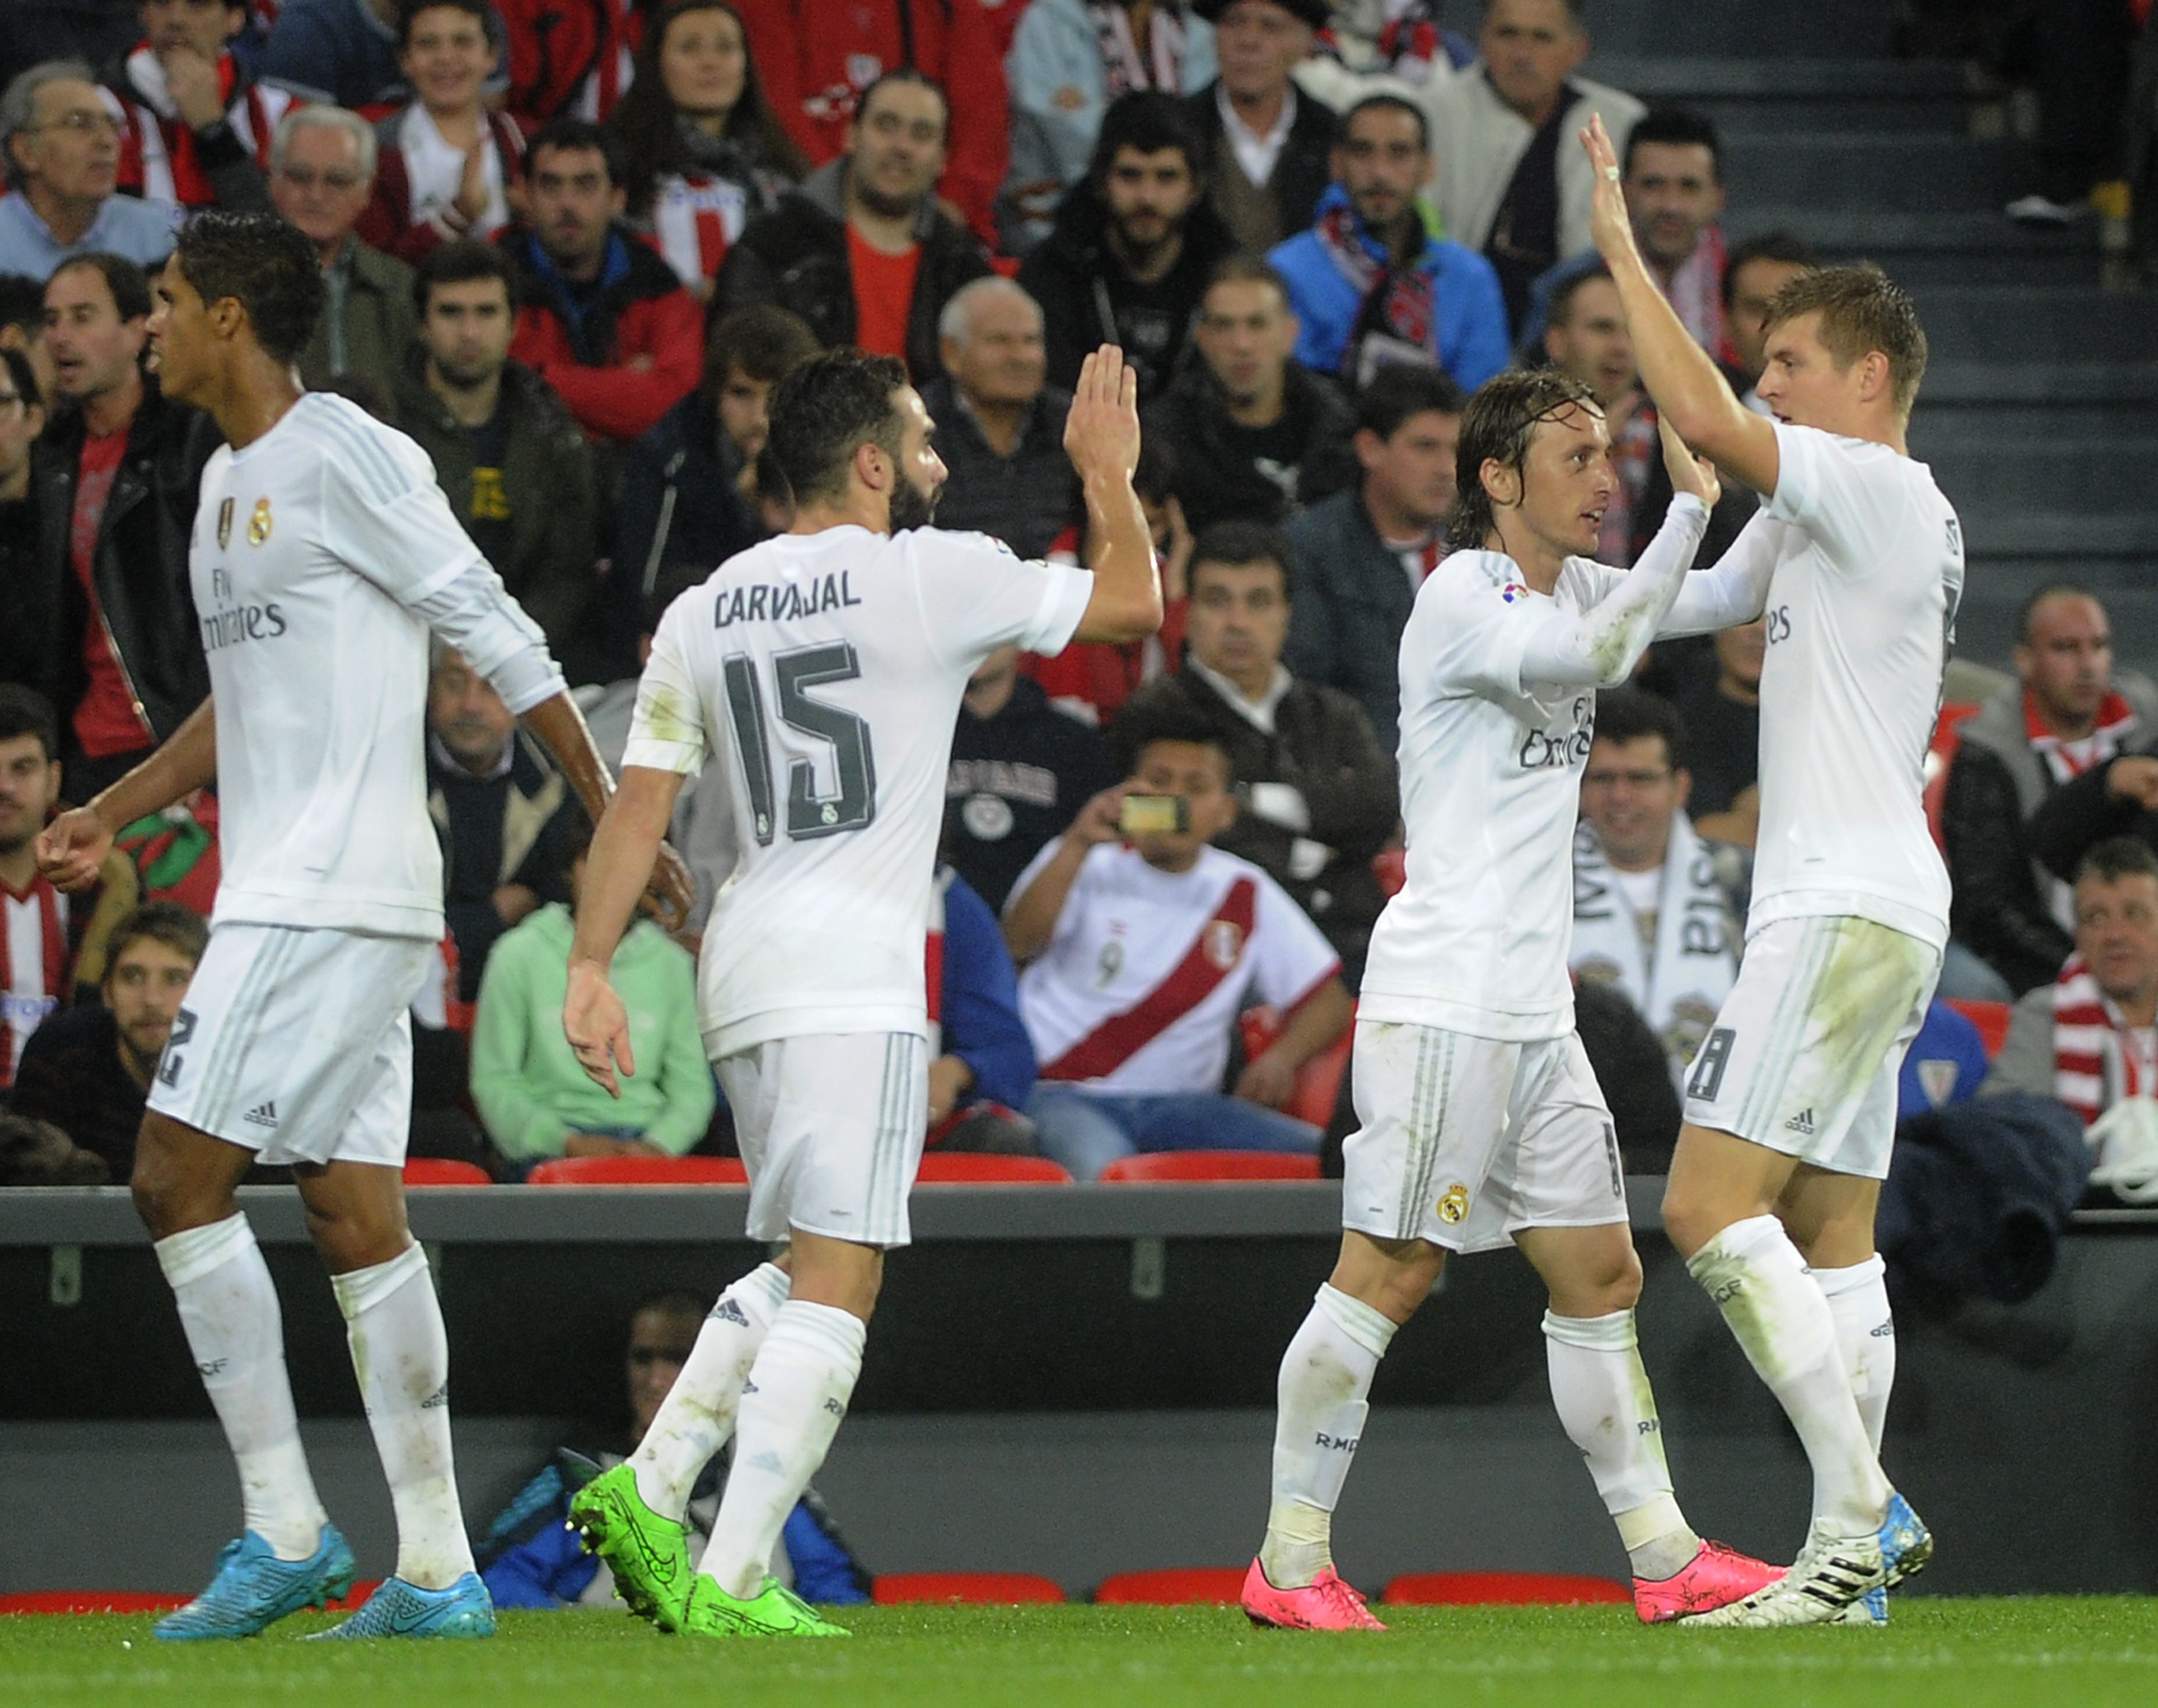 (From L to R) Real Madrid's French defender Raphael Varane, defender Daniel Carvajal, Croatian midfielder Luka Modric and German midfielder Toni Kroos celebrate after scoring during the Spanish league football match Athletic Club vs Real Madrid CF at the San Mames stadium in Bilbao on September 23, 2015. AFP PHOTO / ANDER GILLENEA        (Photo credit should read ANDER GILLENEA/AFP/Getty Images)